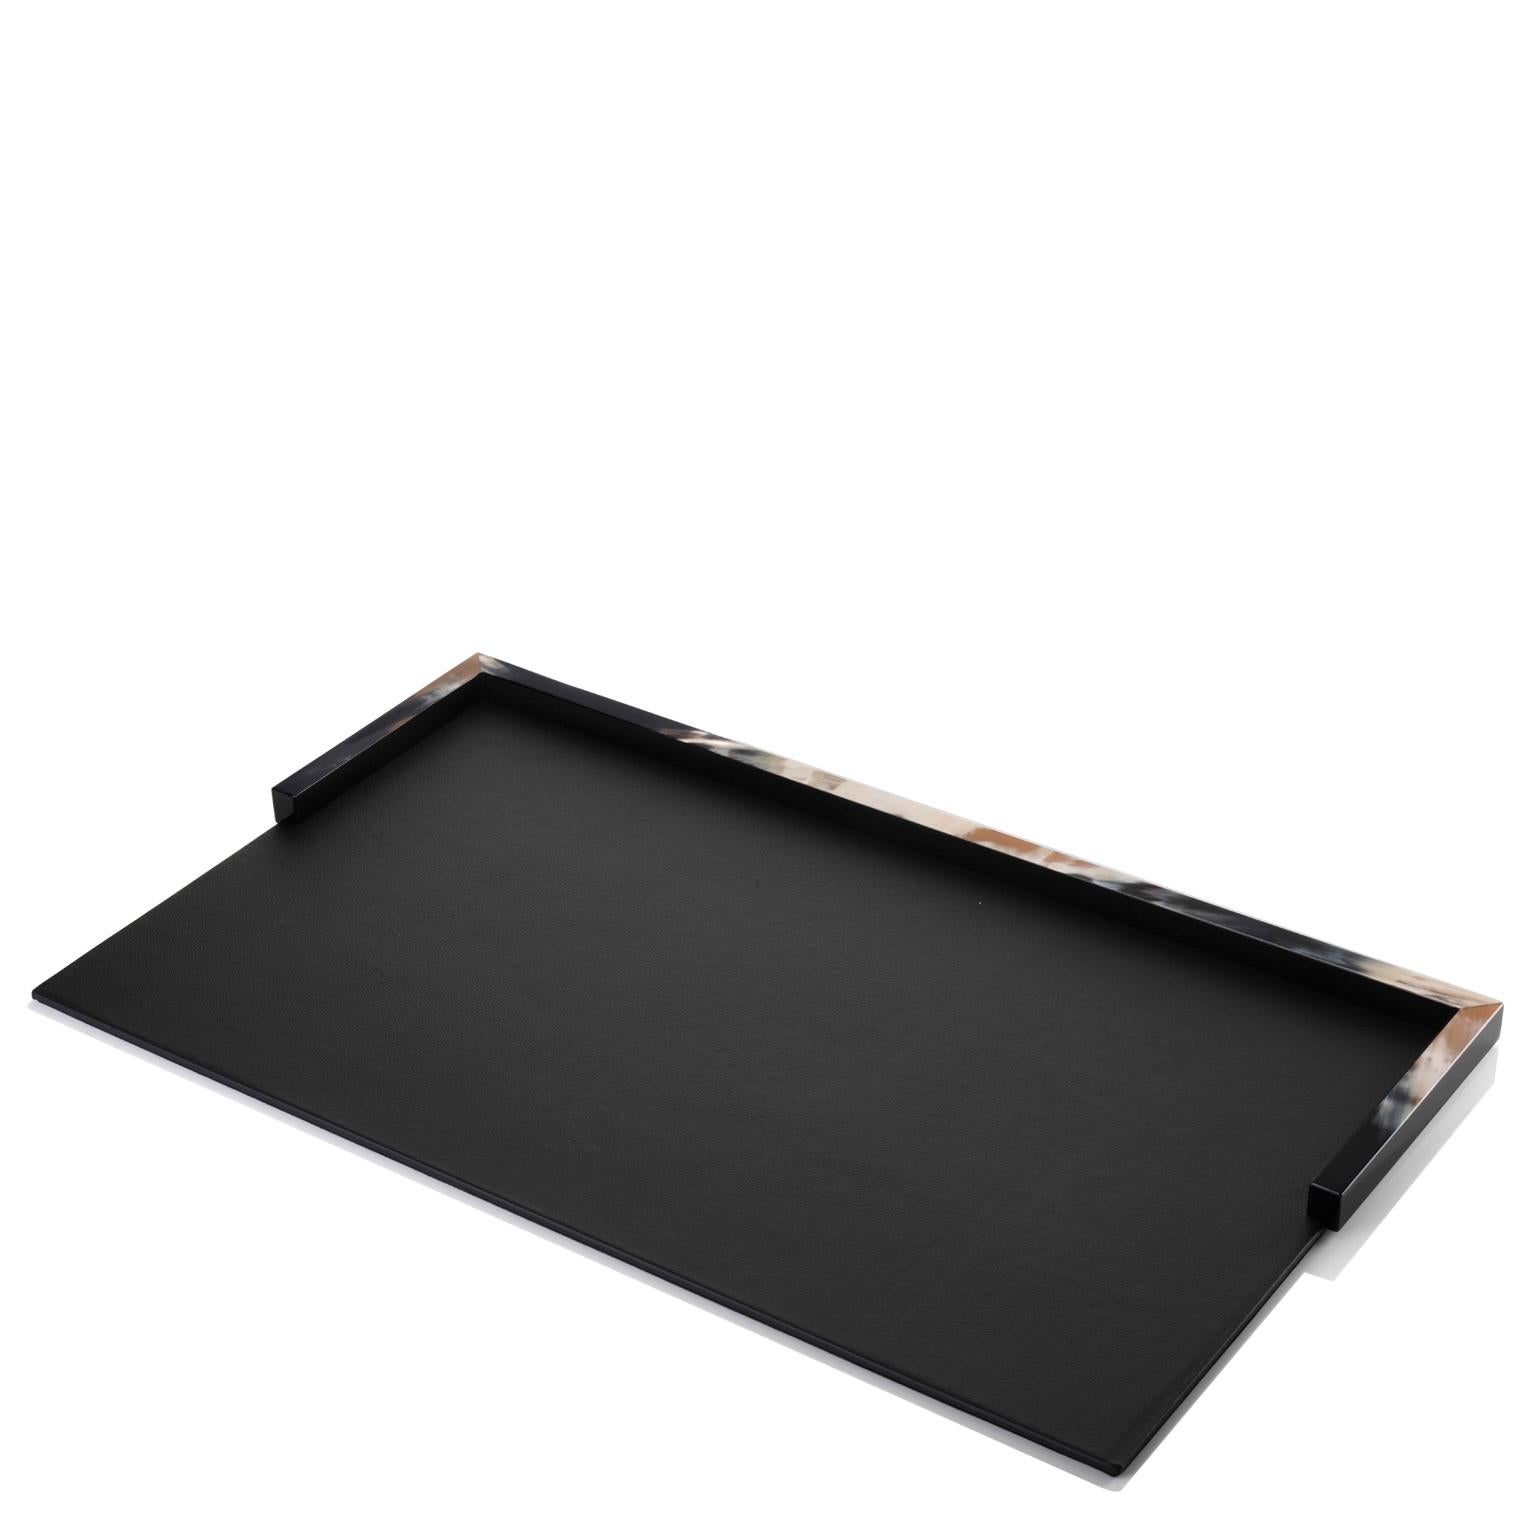 Boasting prized materials and refined lines, our Calipso desk blotter will ensure a smooth work area while protecting the surface of your desk. Crafted of premium black Tosca leather (cat. Super), this pad features an elegant semi-rectangular frame